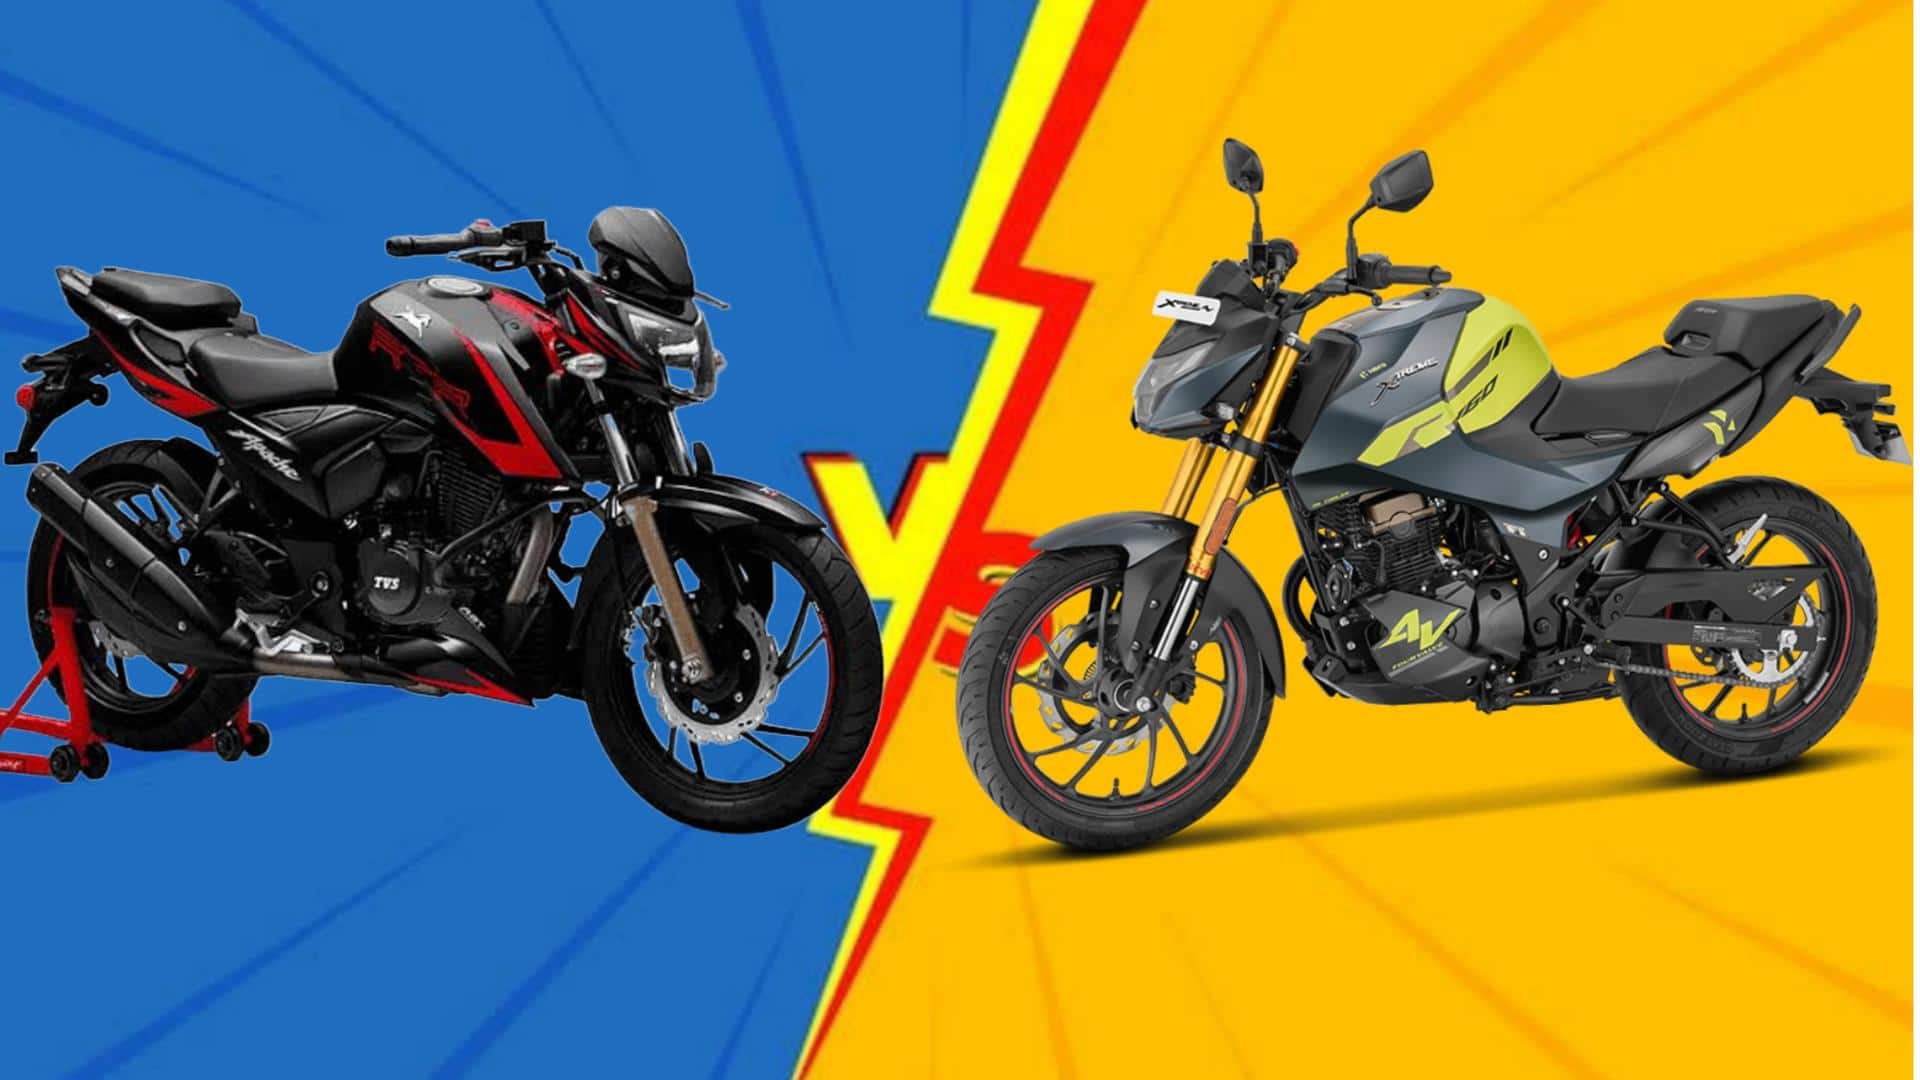 Is Hero Xtreme 160R better than TVS Apache RTR 160